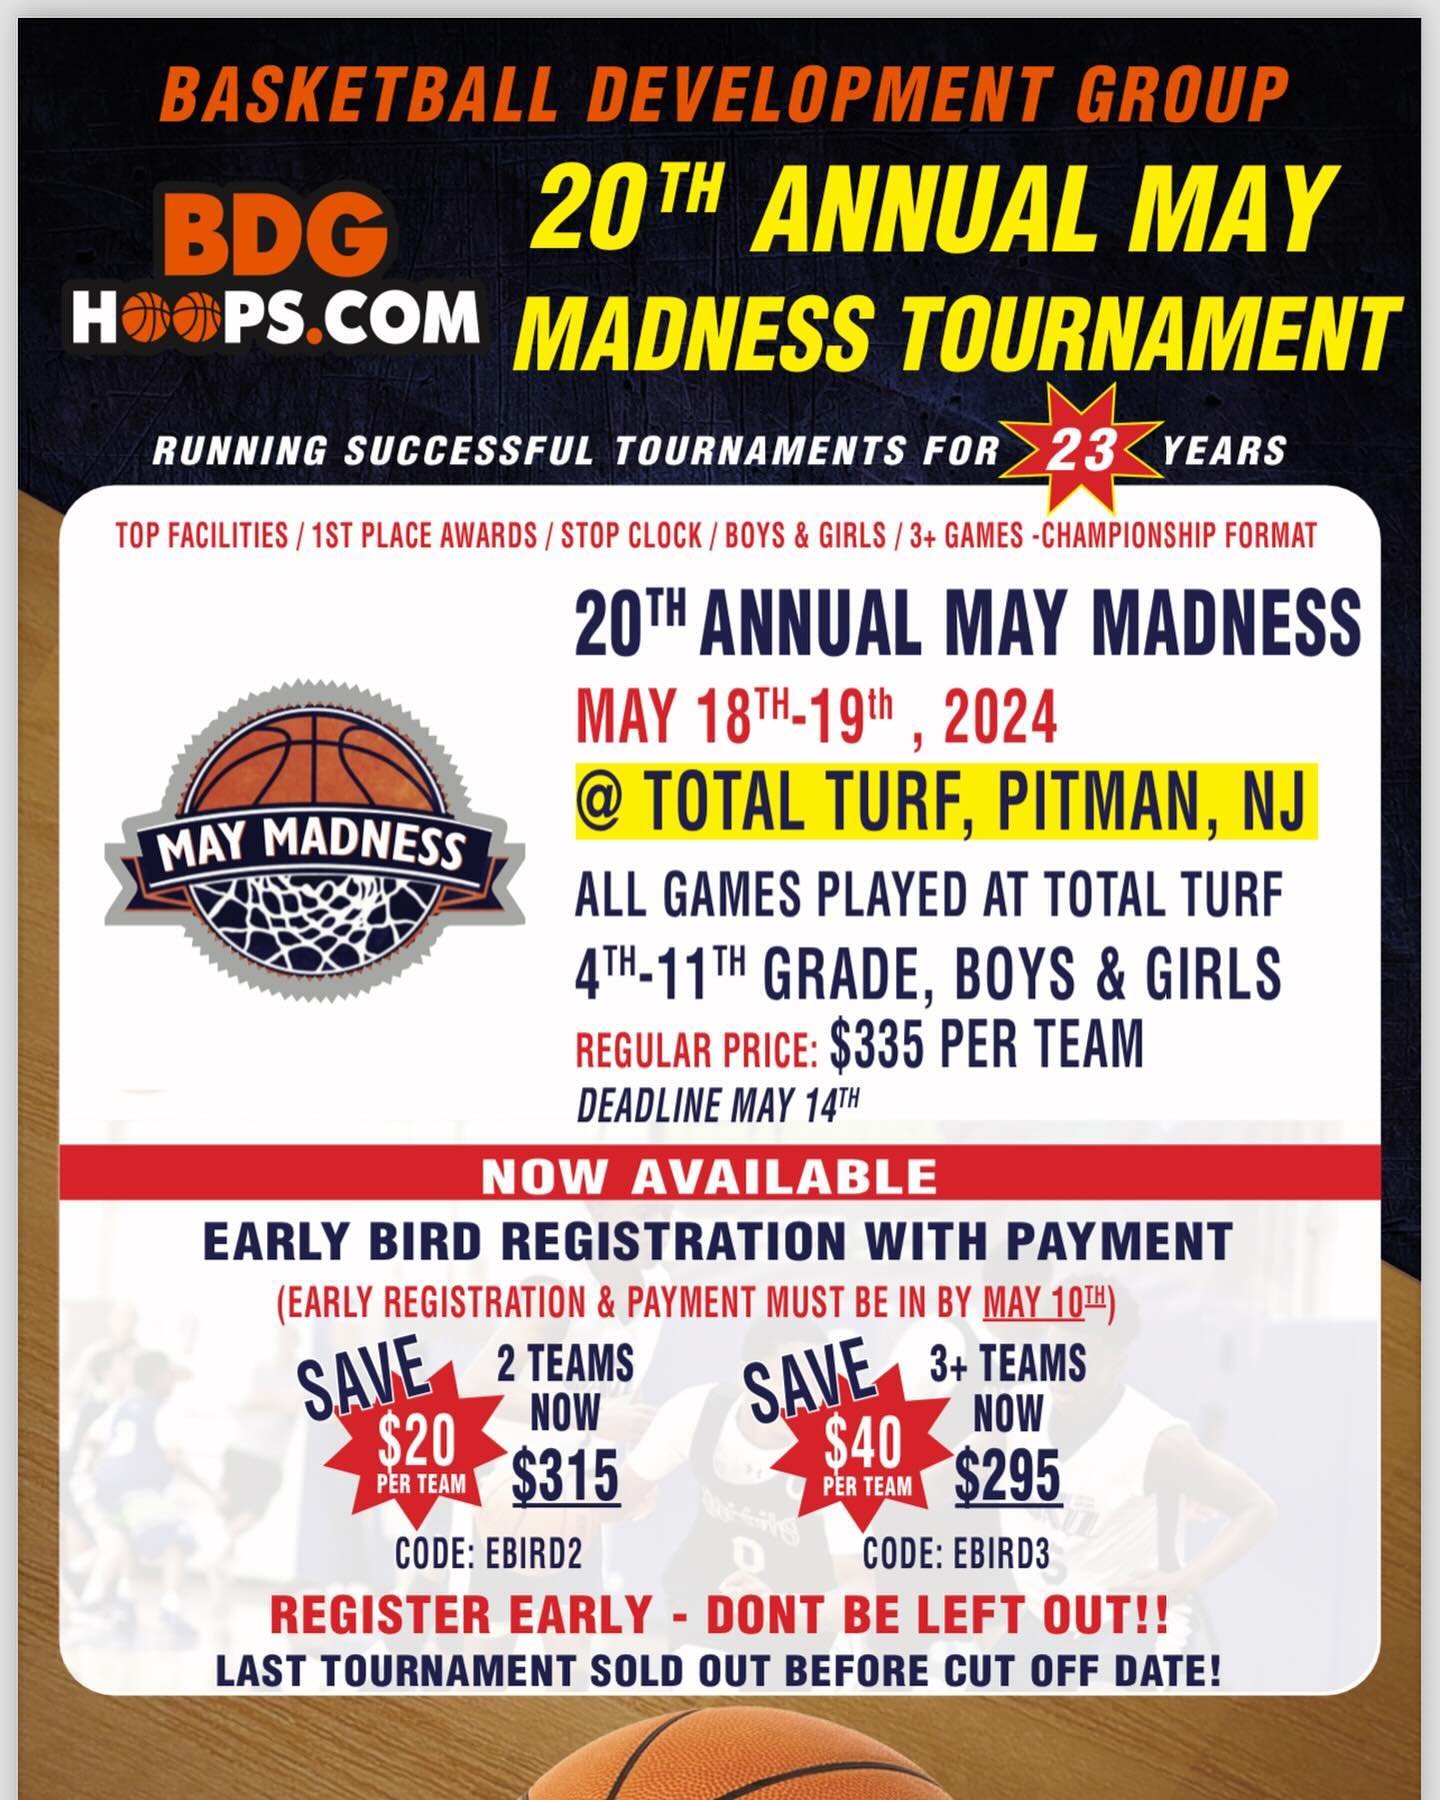 🔥REGISTER NOW AT WWW.BDGHOOPS.COM🔥